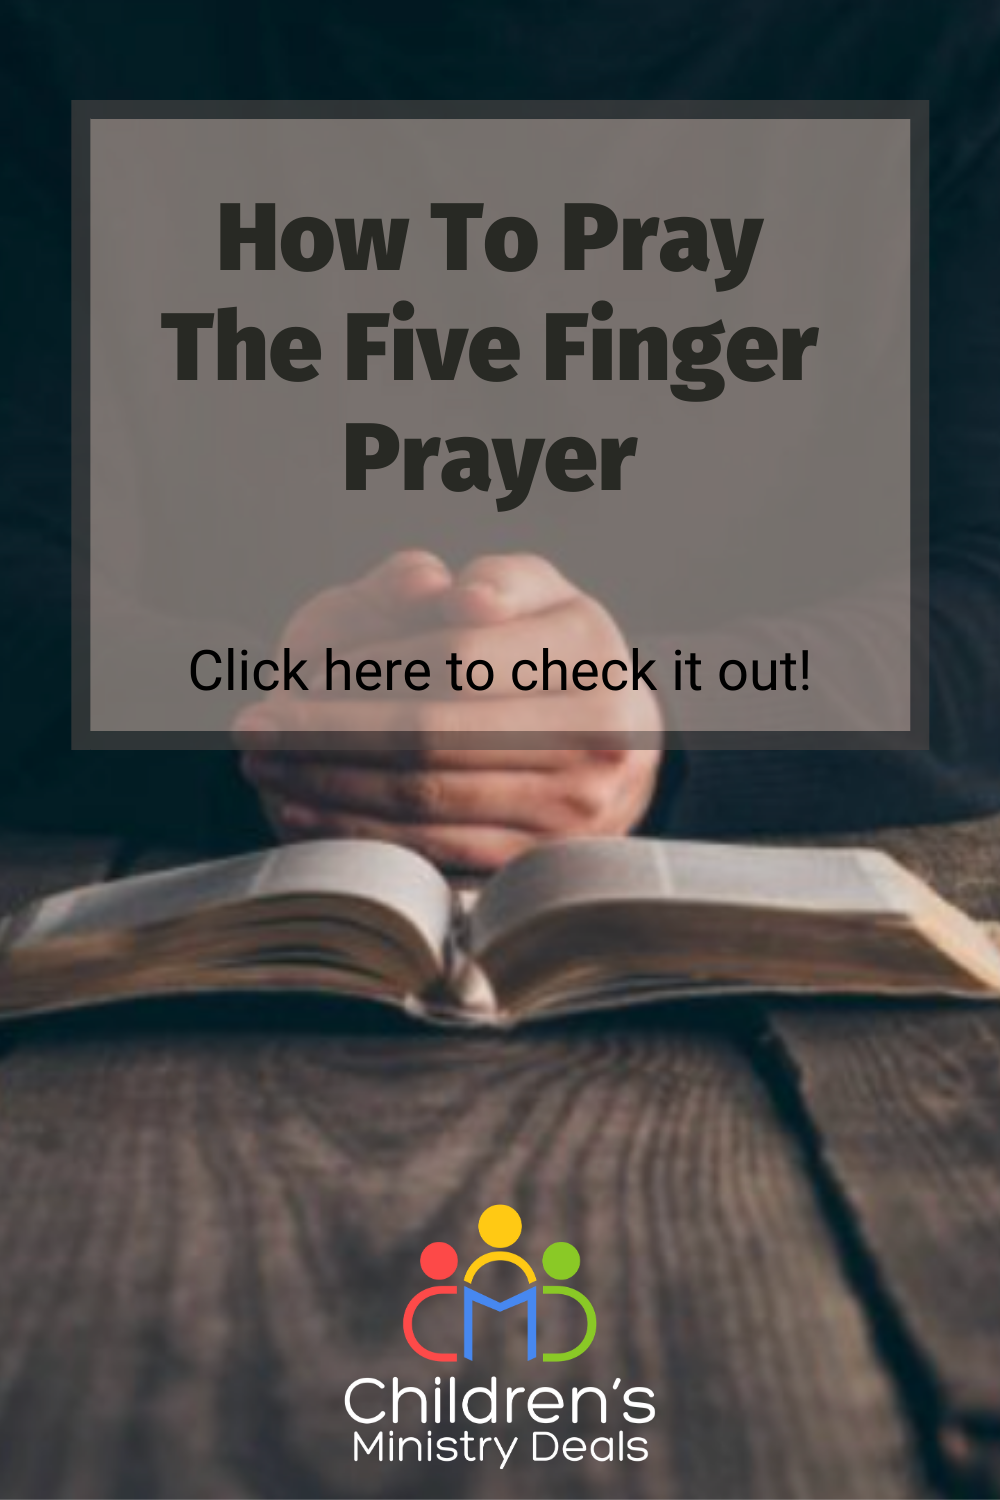 How To Pray The Five Finger Prayer